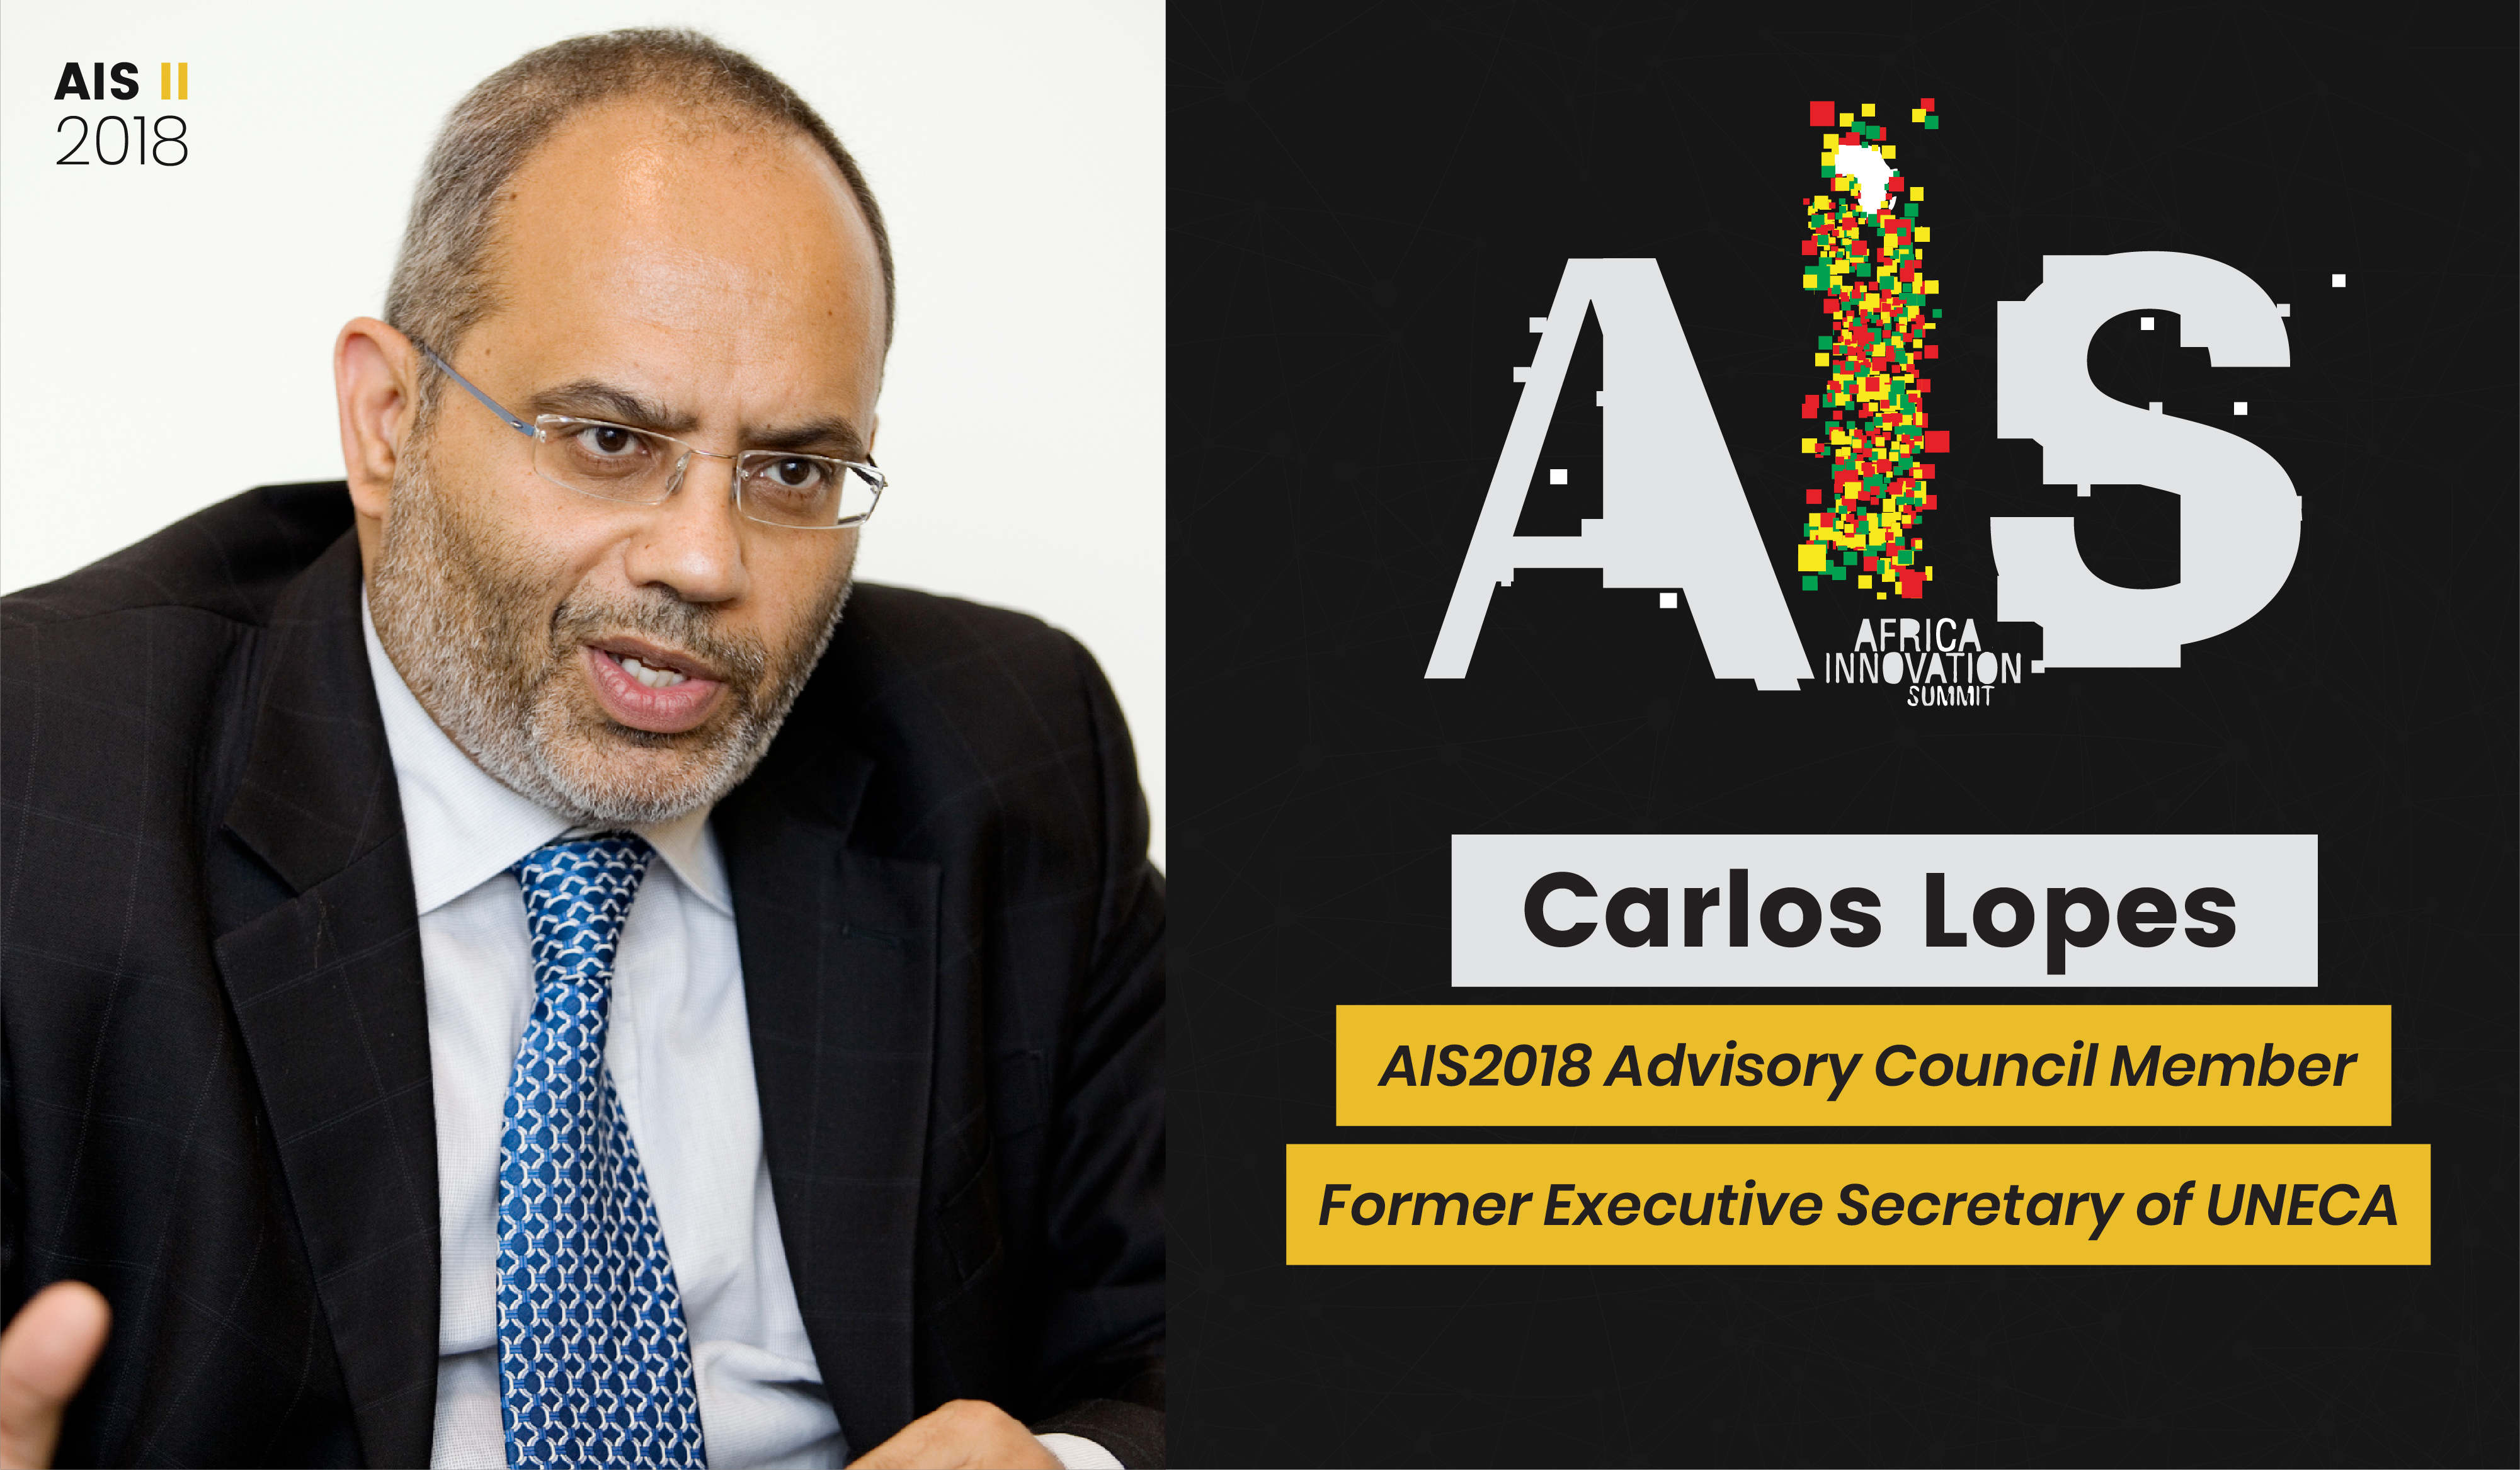 AIS2018 Advisory Council Member Carlos Lopes on Innovation with “Top In Business Bytes” 